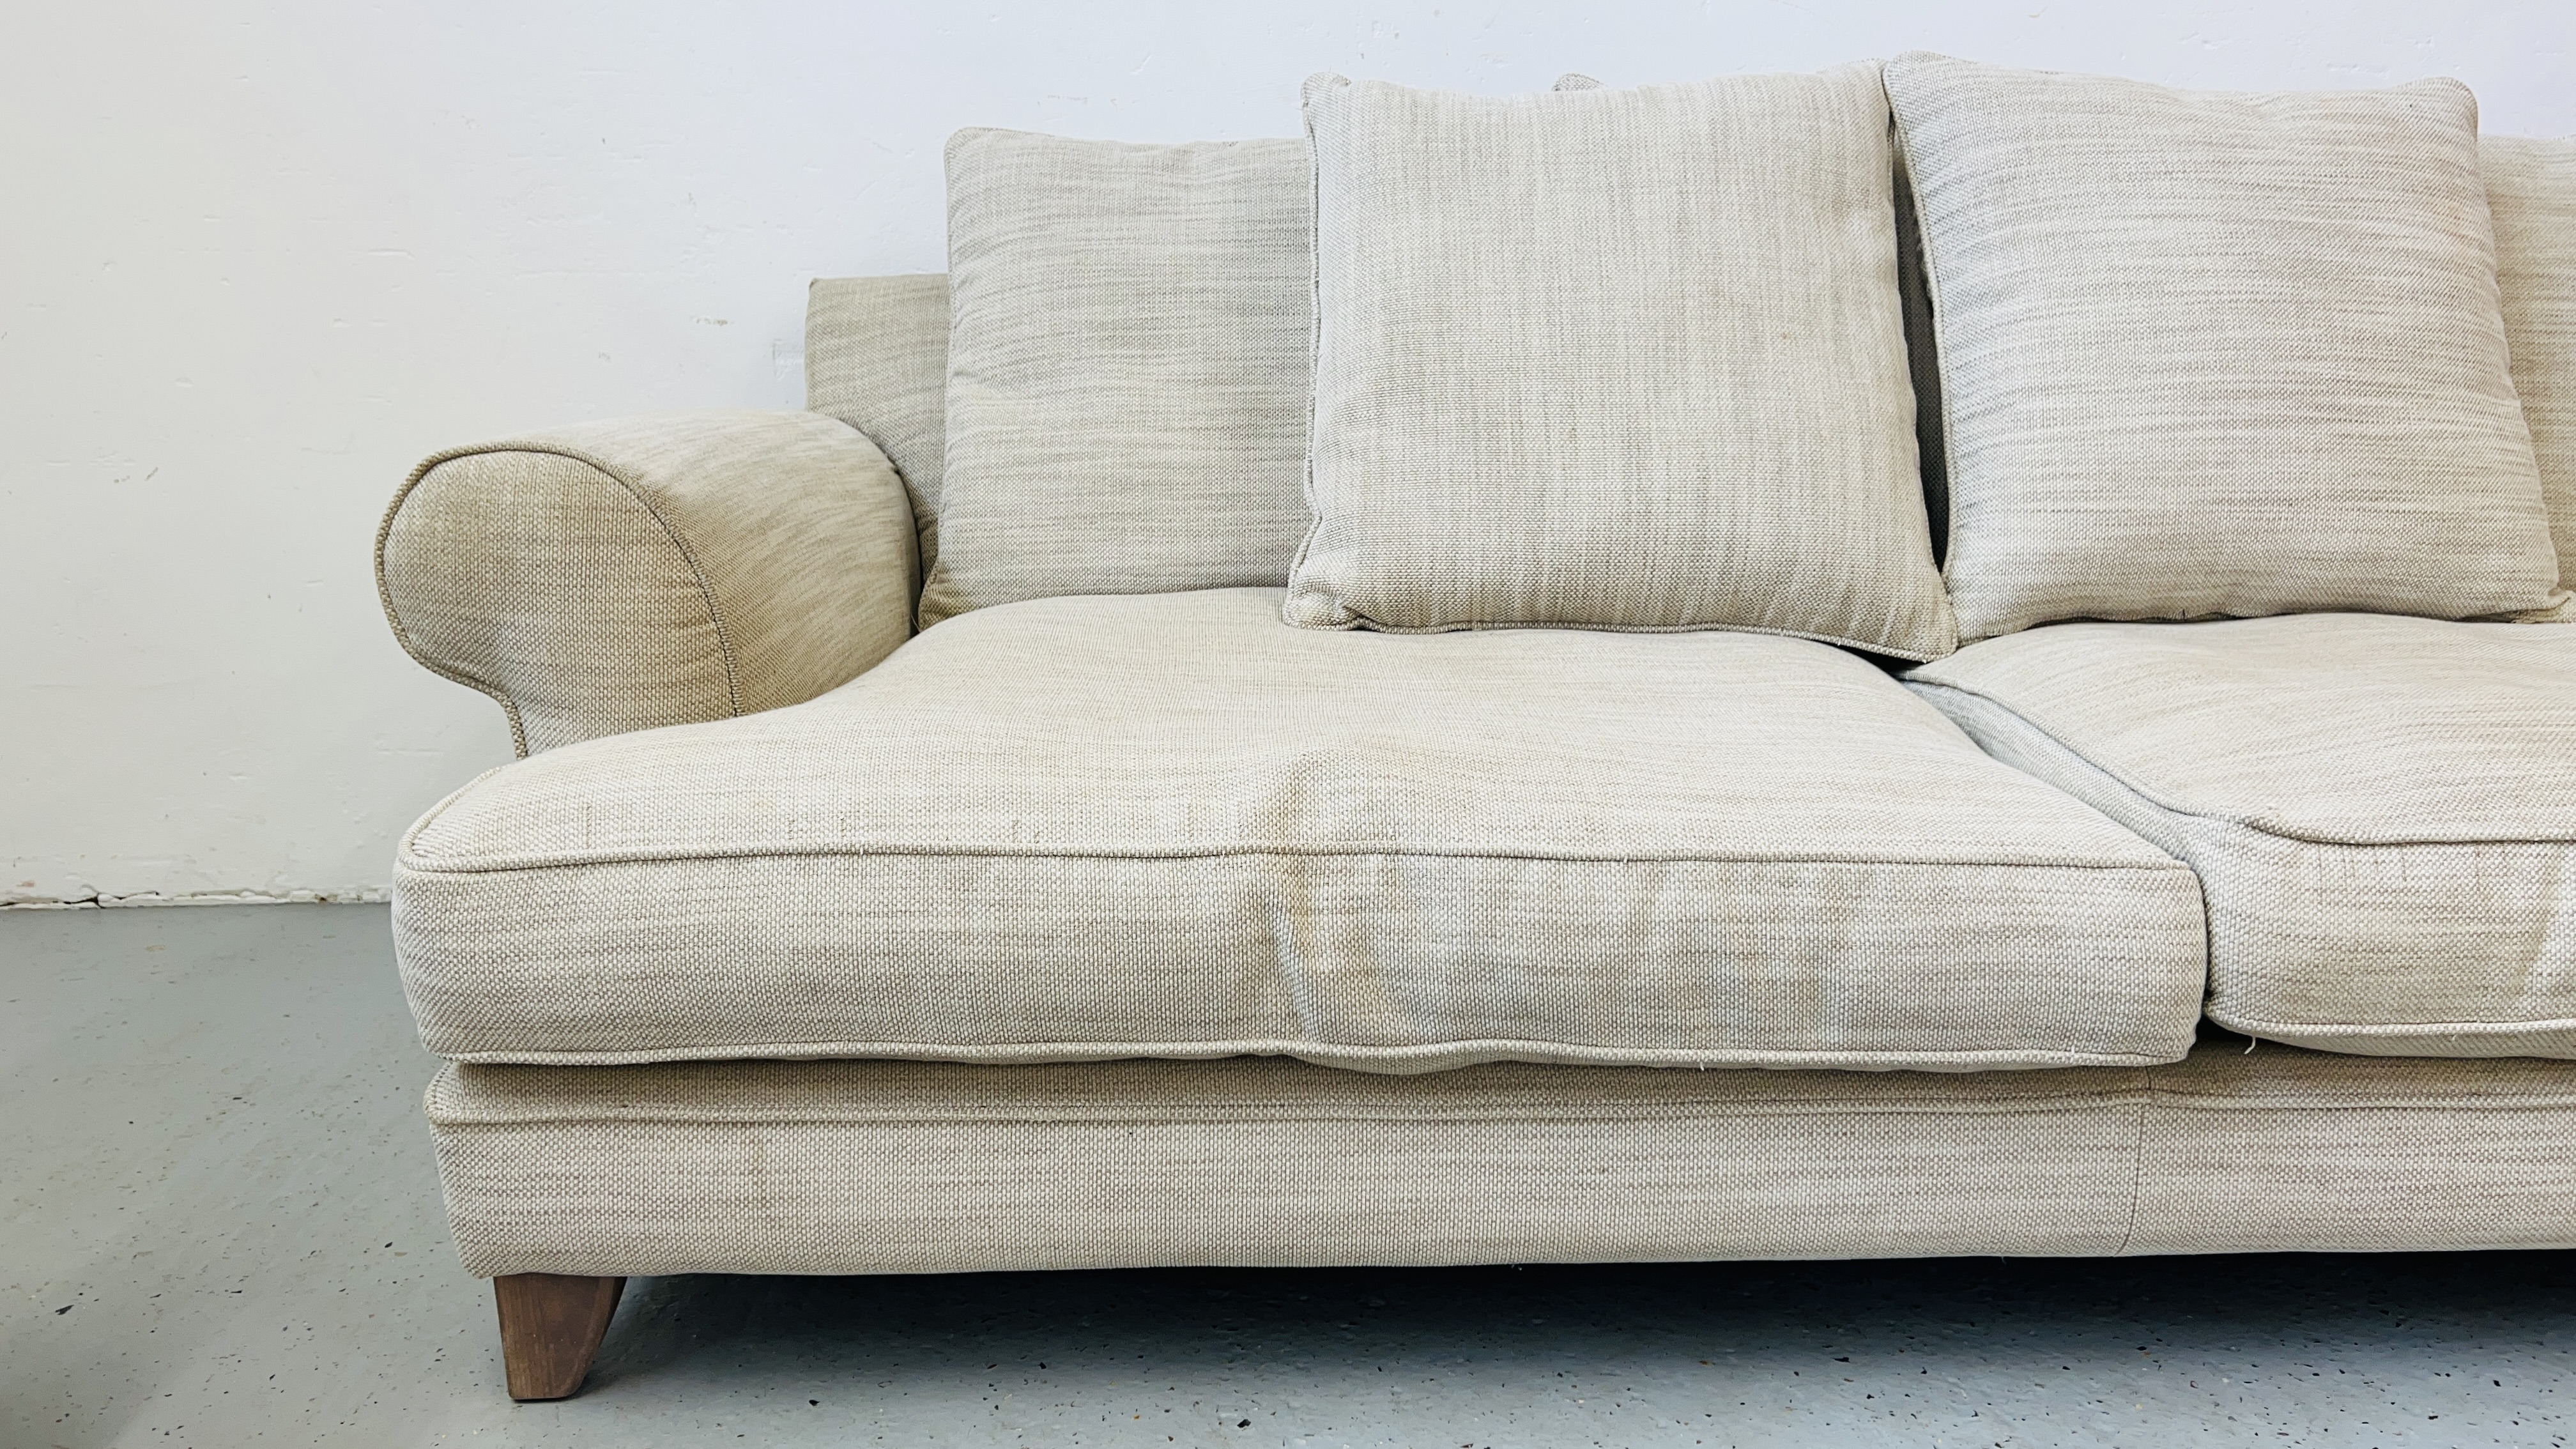 A PAIR OF "THE LOUNGE Co" OATMEAL UPHOLSTERED SOFA'S EACH LENGTH 210CM. - Image 18 of 22